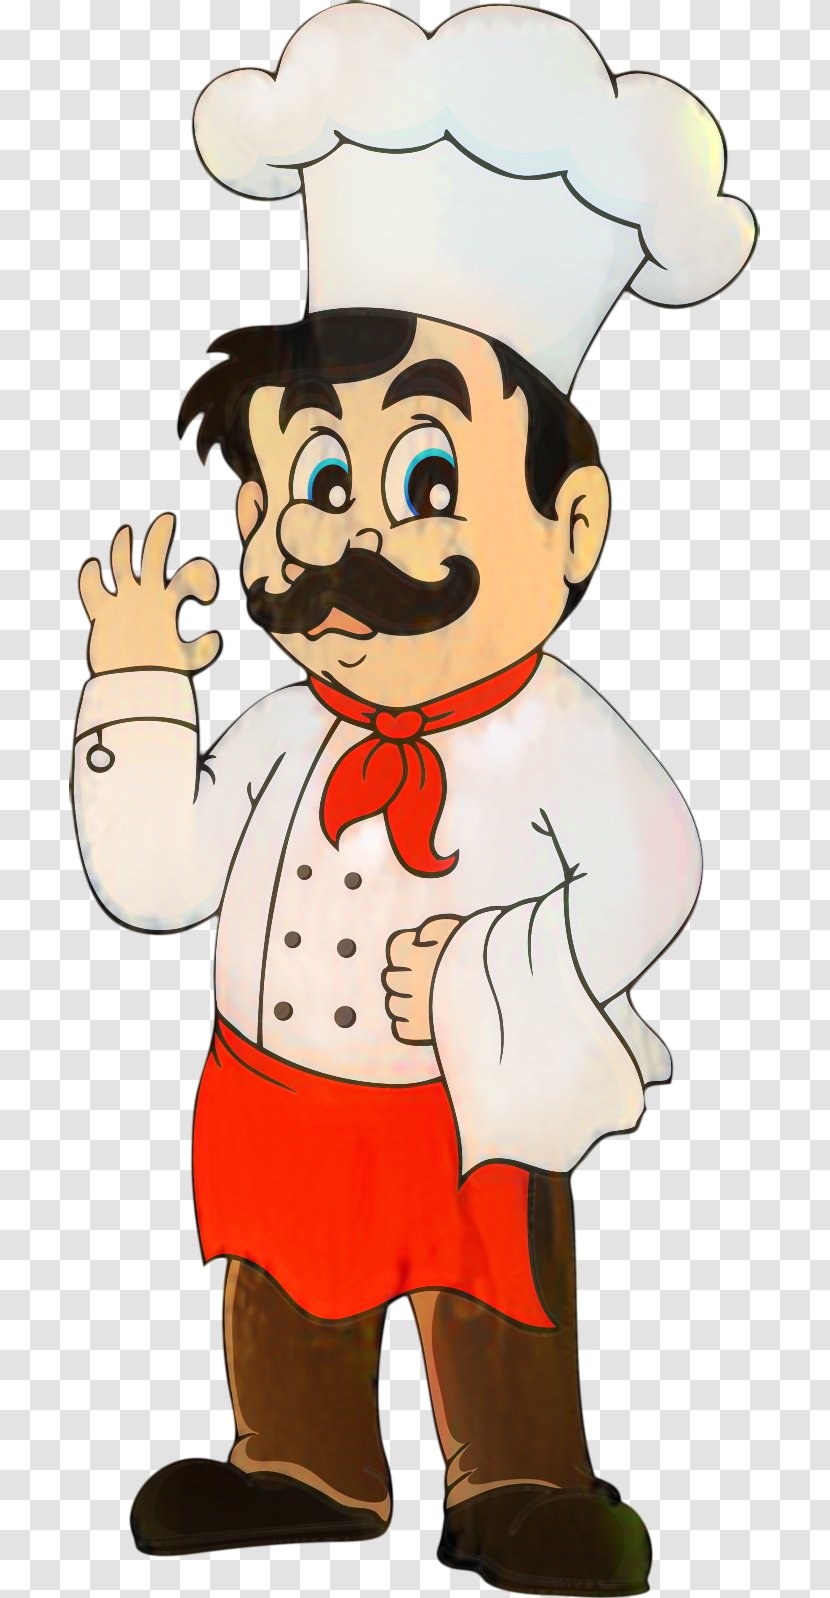 Chef Cartoon - Pleased Gesture Transparent PNG